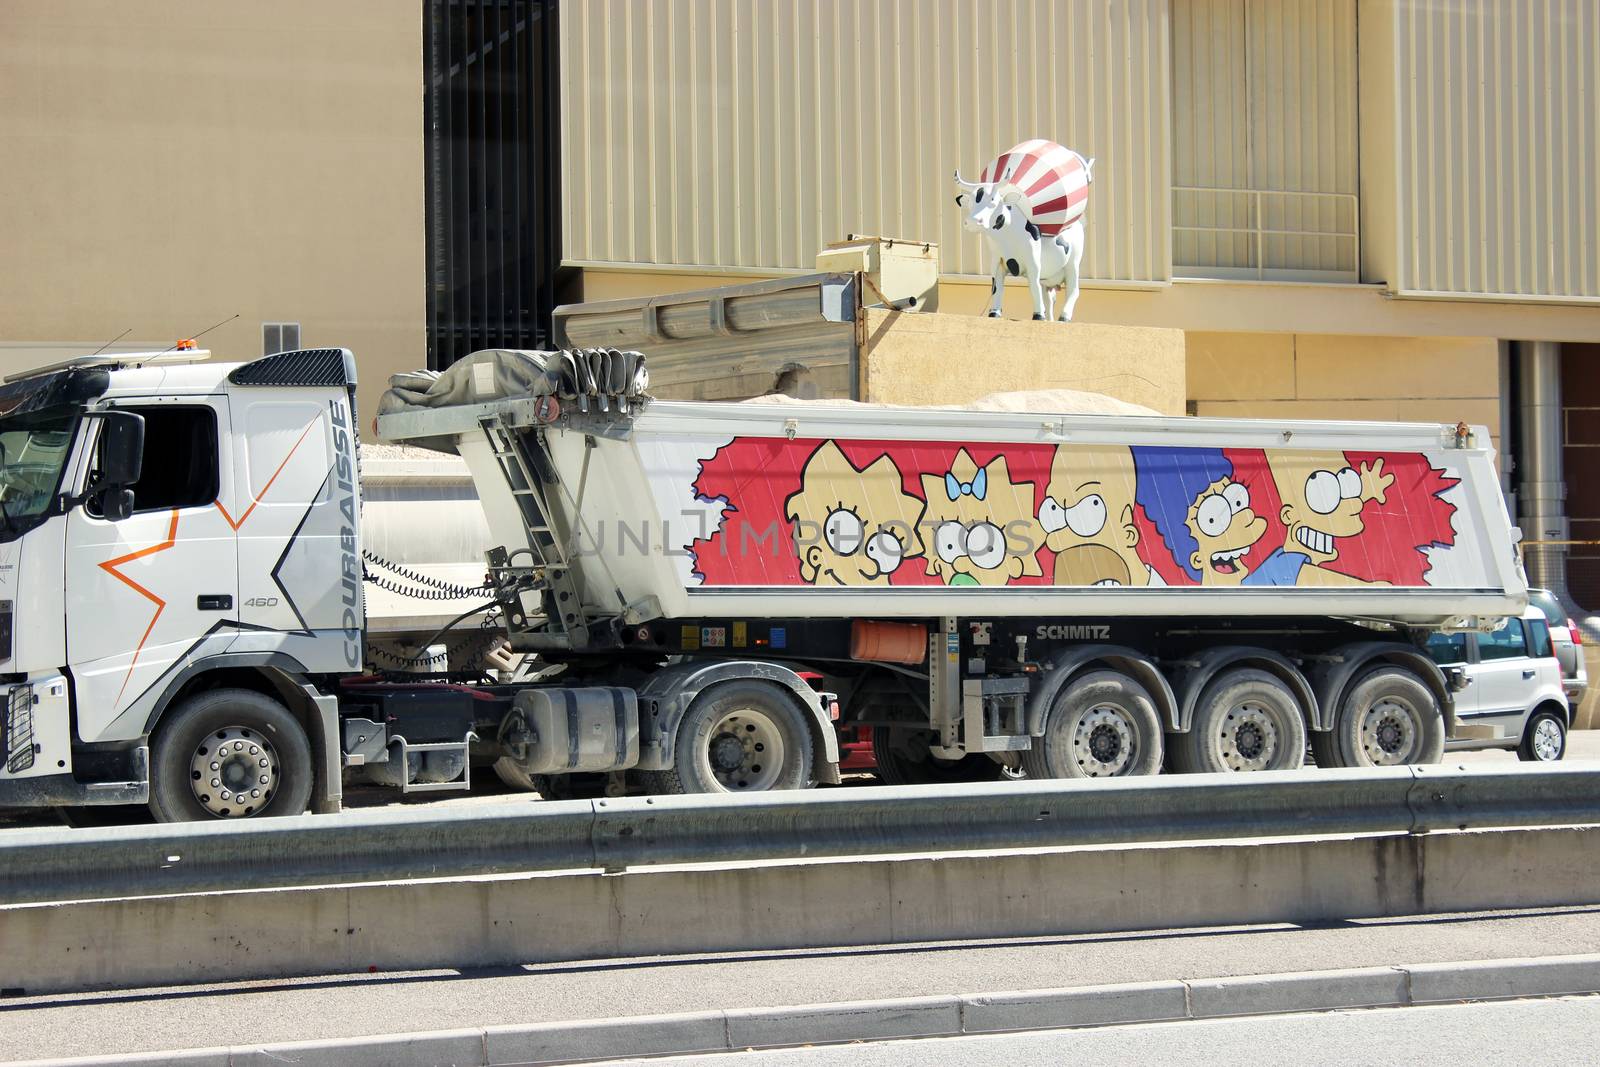 The Simpsons Truck by bensib